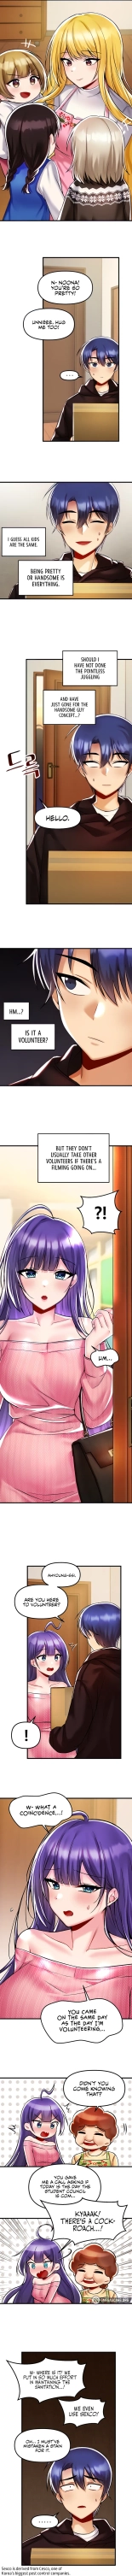 Trapped in the Academy's Eroge : página 292